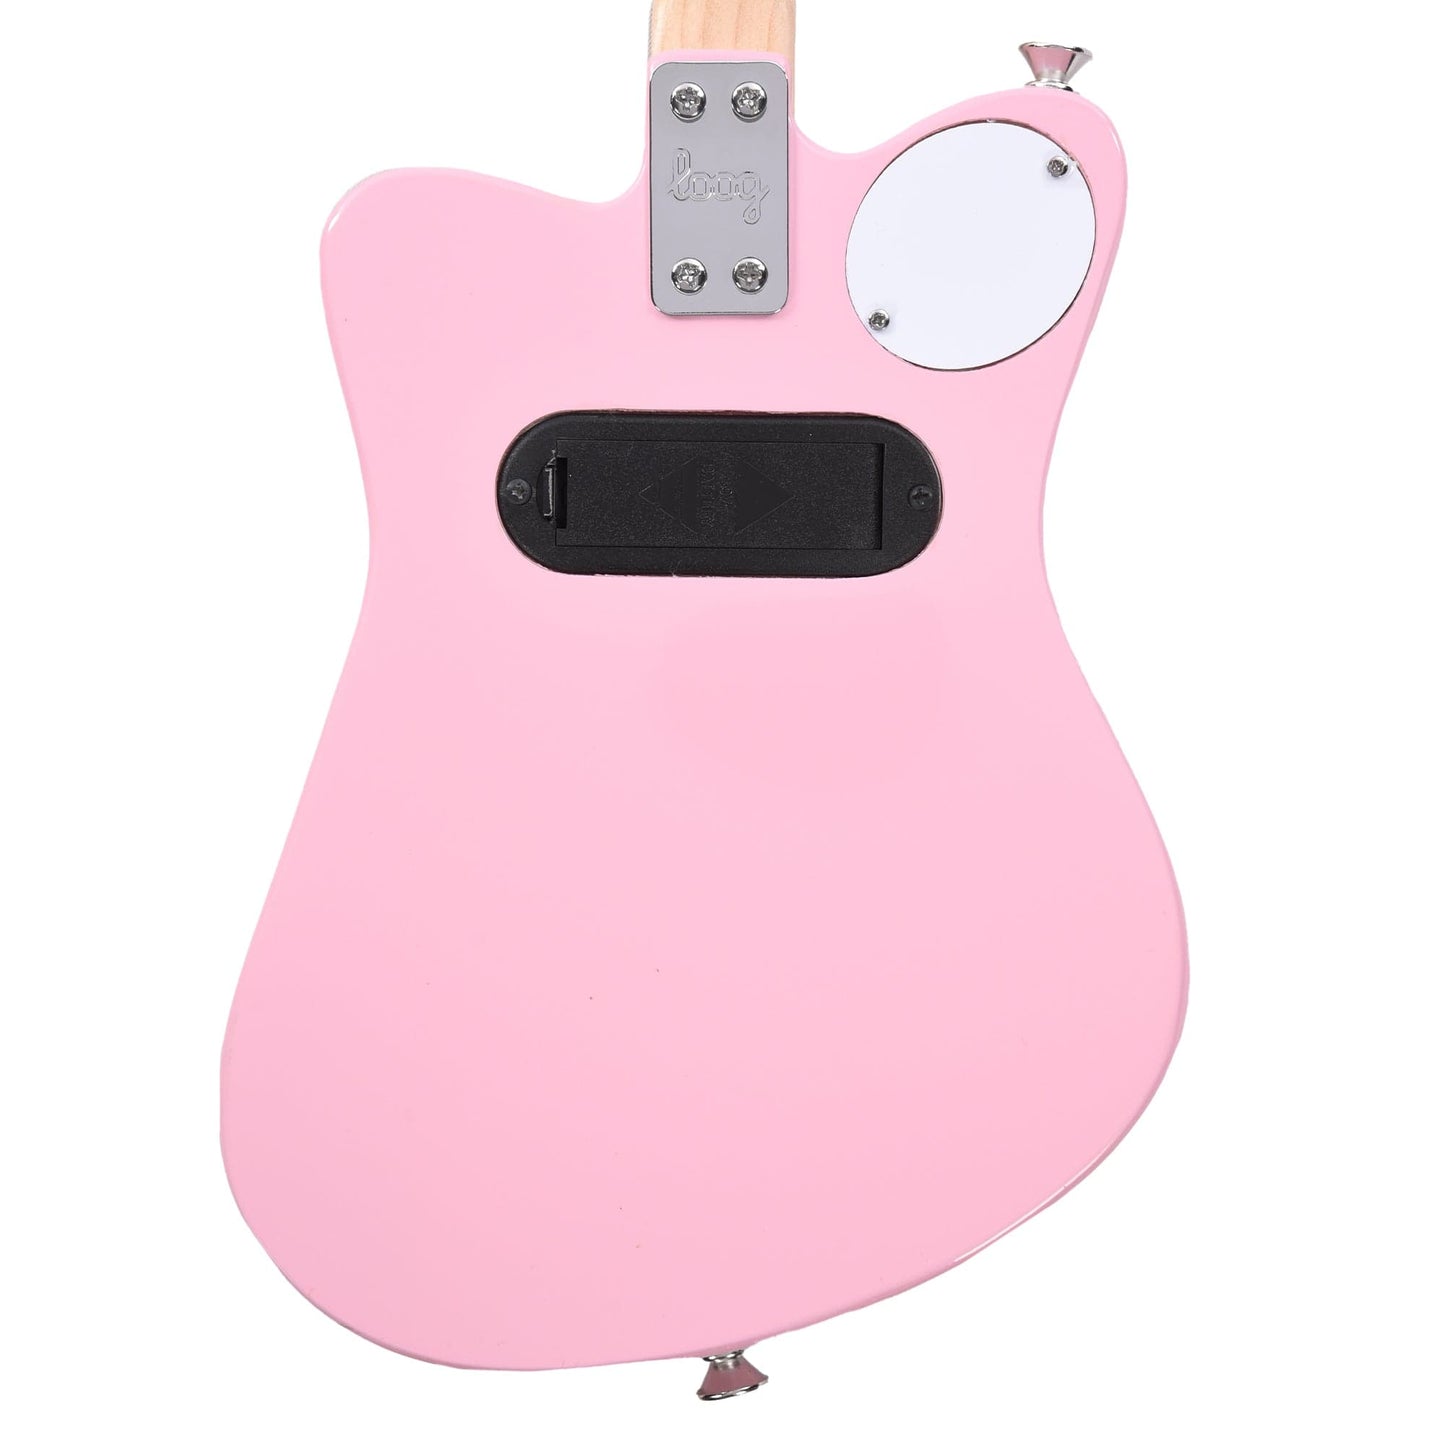 Loog Mini Electric 3-String Pink Electric Guitars / Solid Body